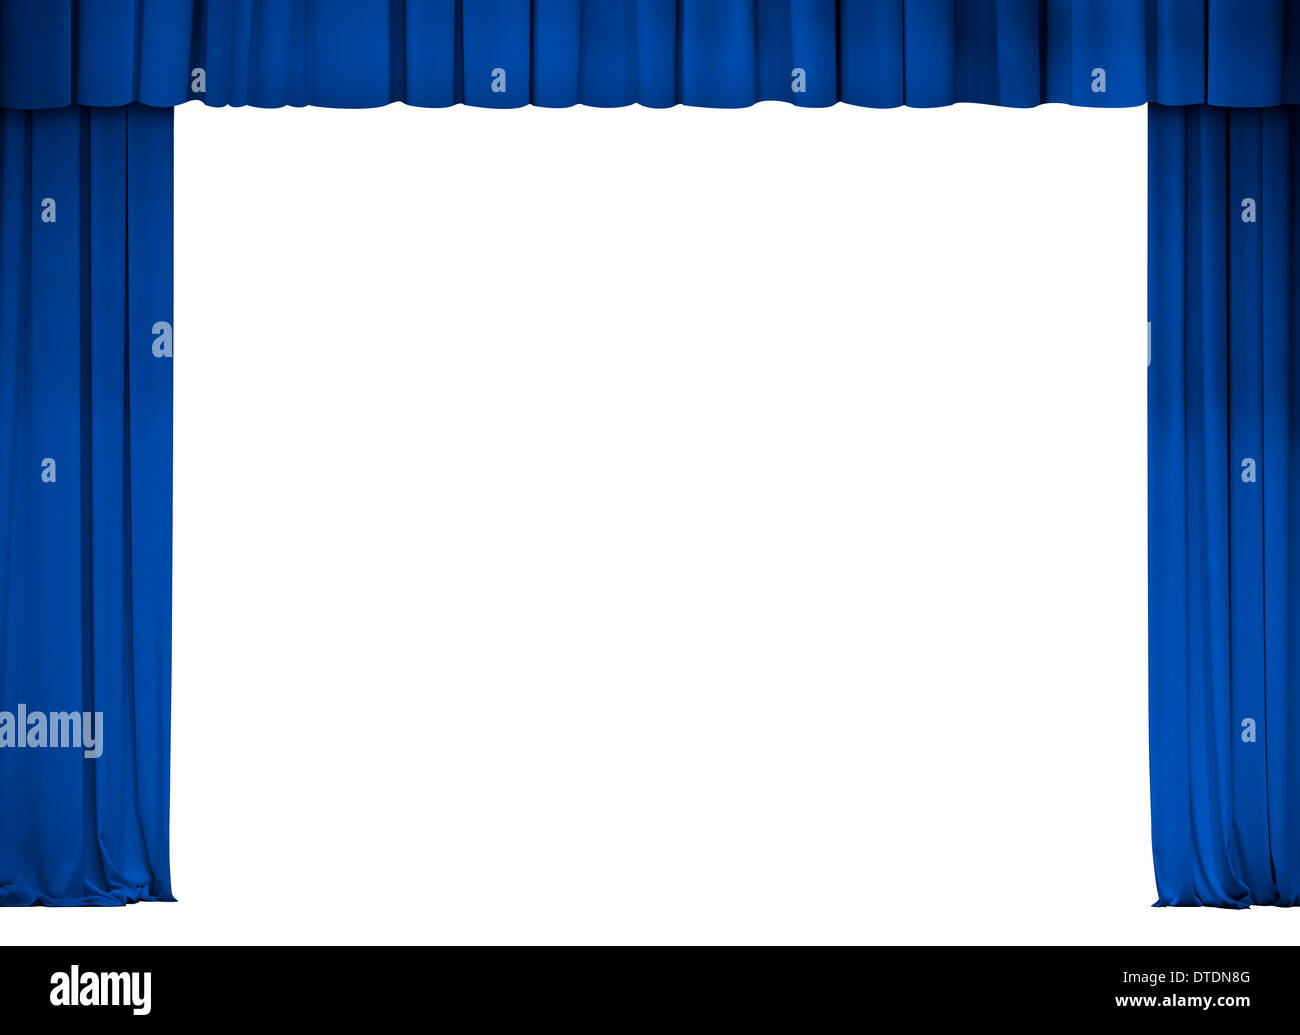 theater or cinema blue curtain frame isolated on white Stock Photo